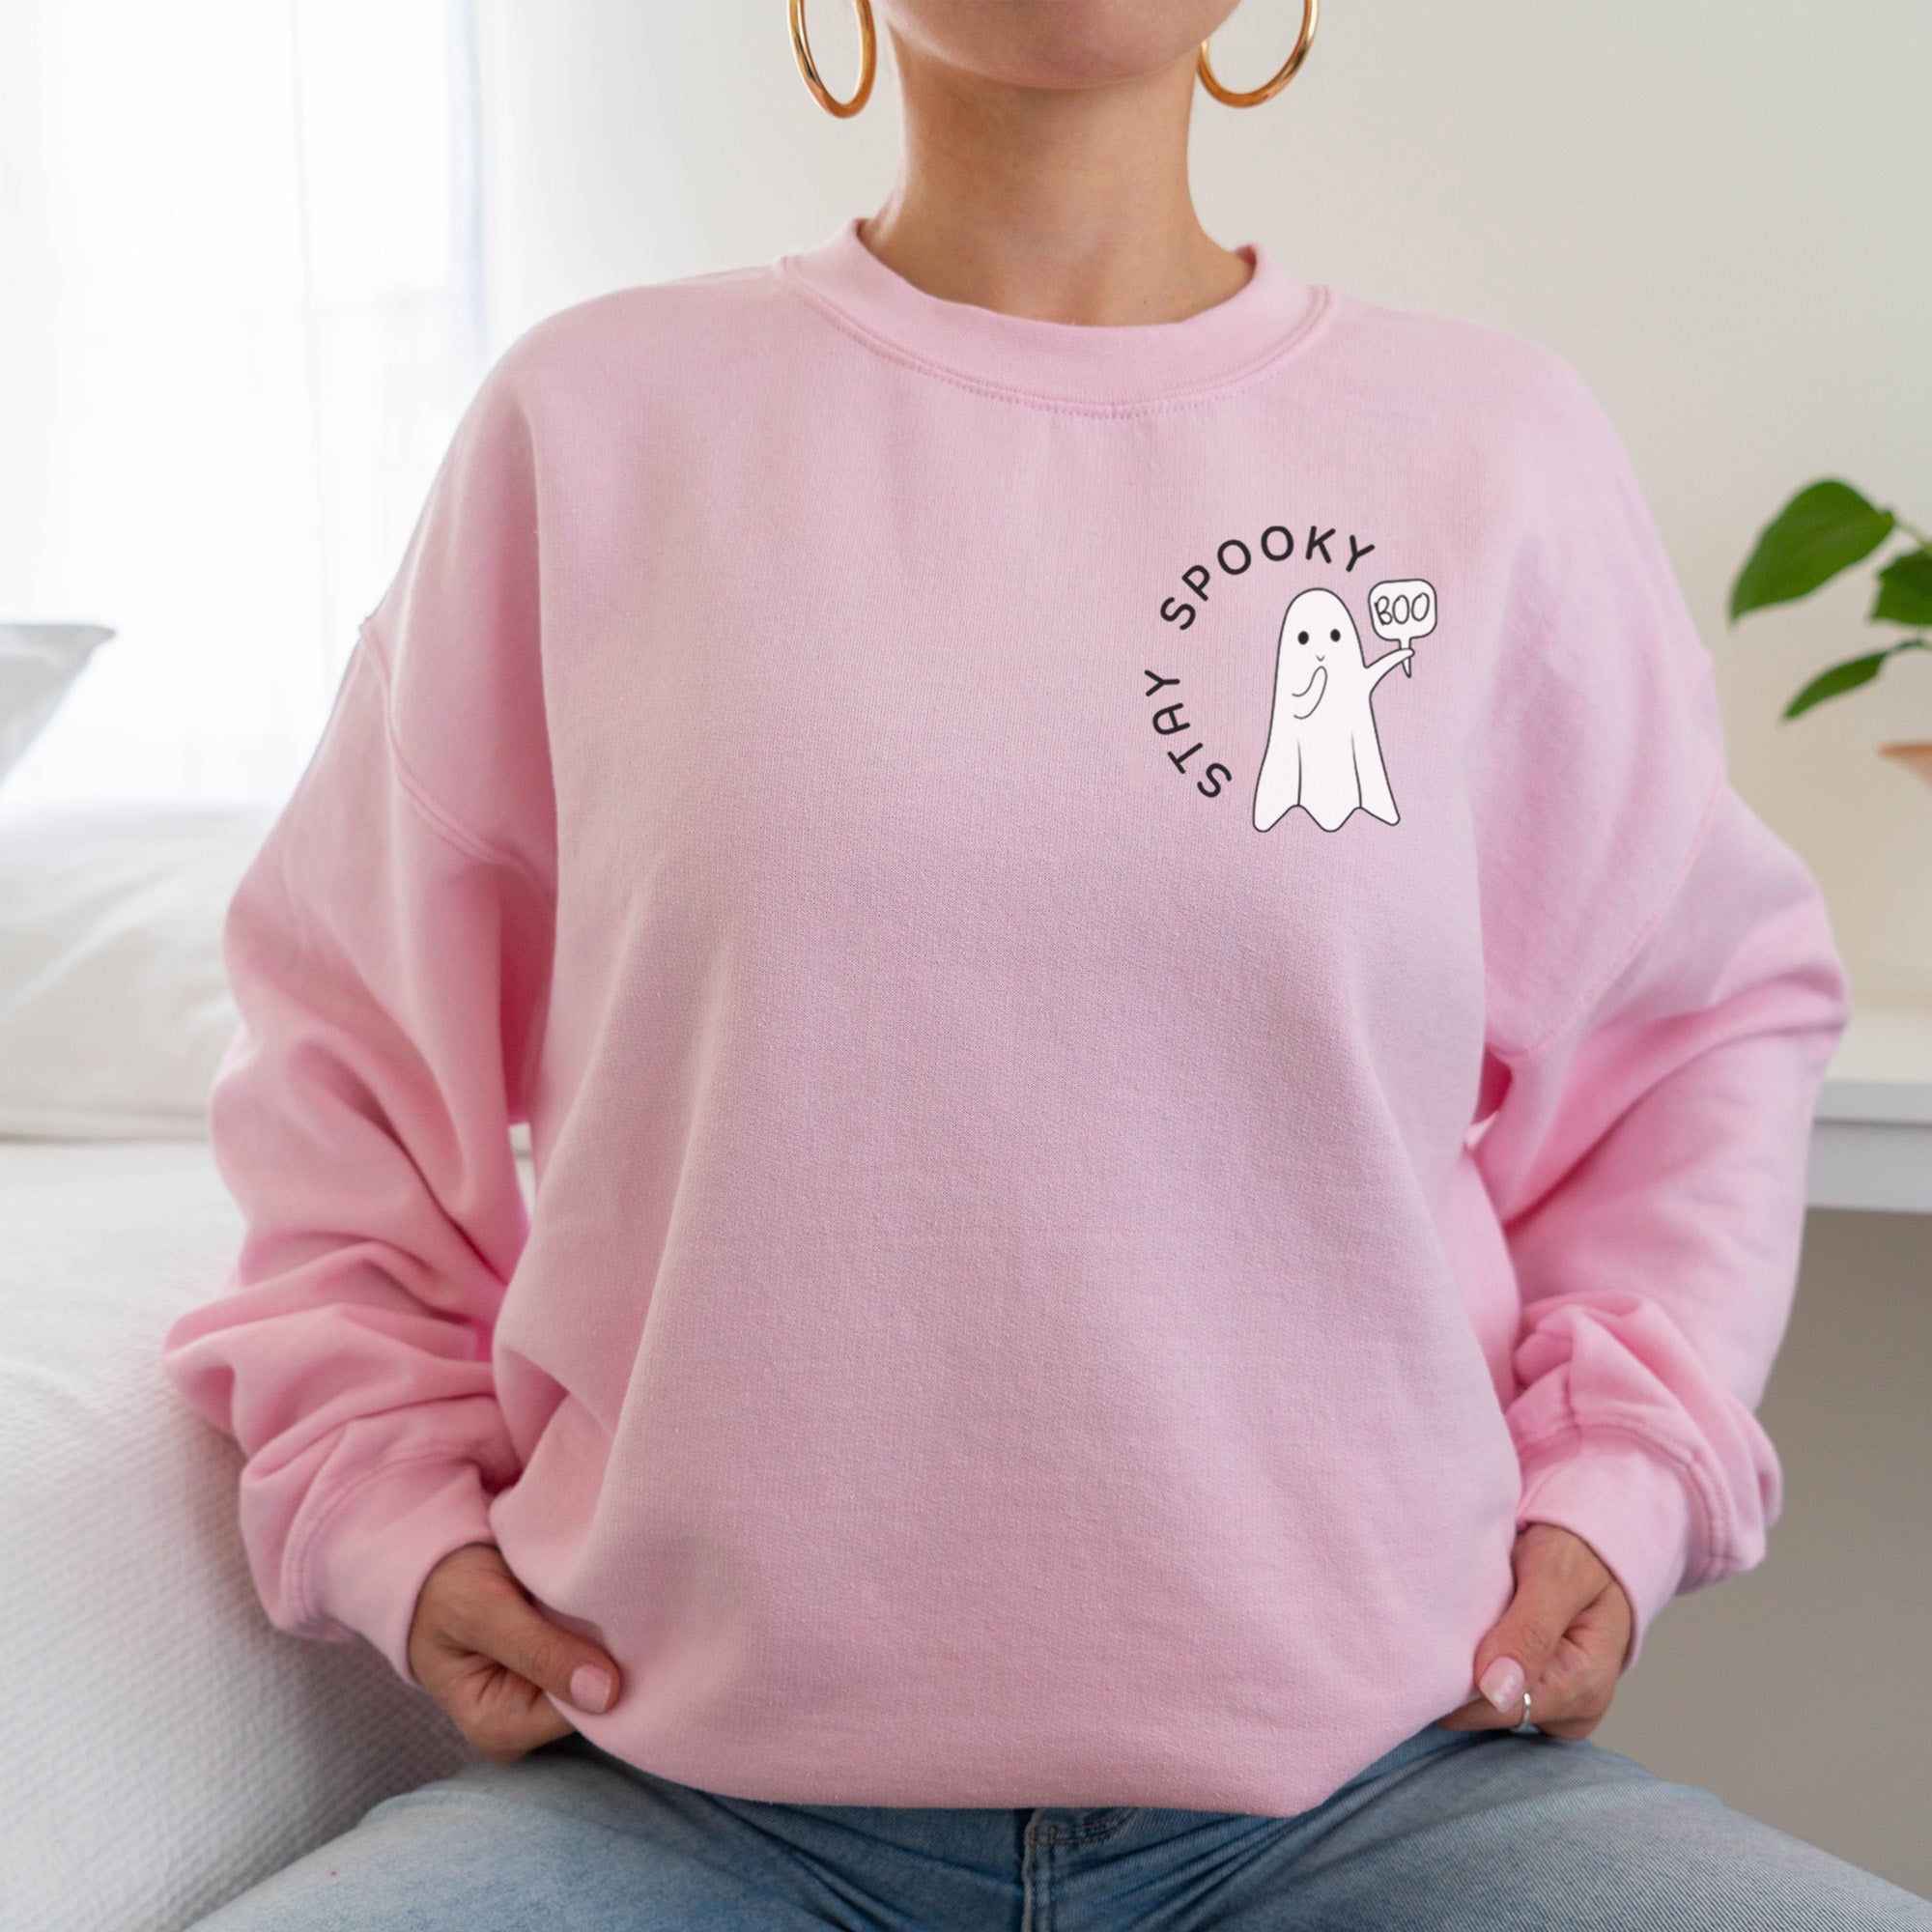 Cute Halloween Sweatshirt for women featuring the words Stay Spooky with a friendly ghost. all SKUs